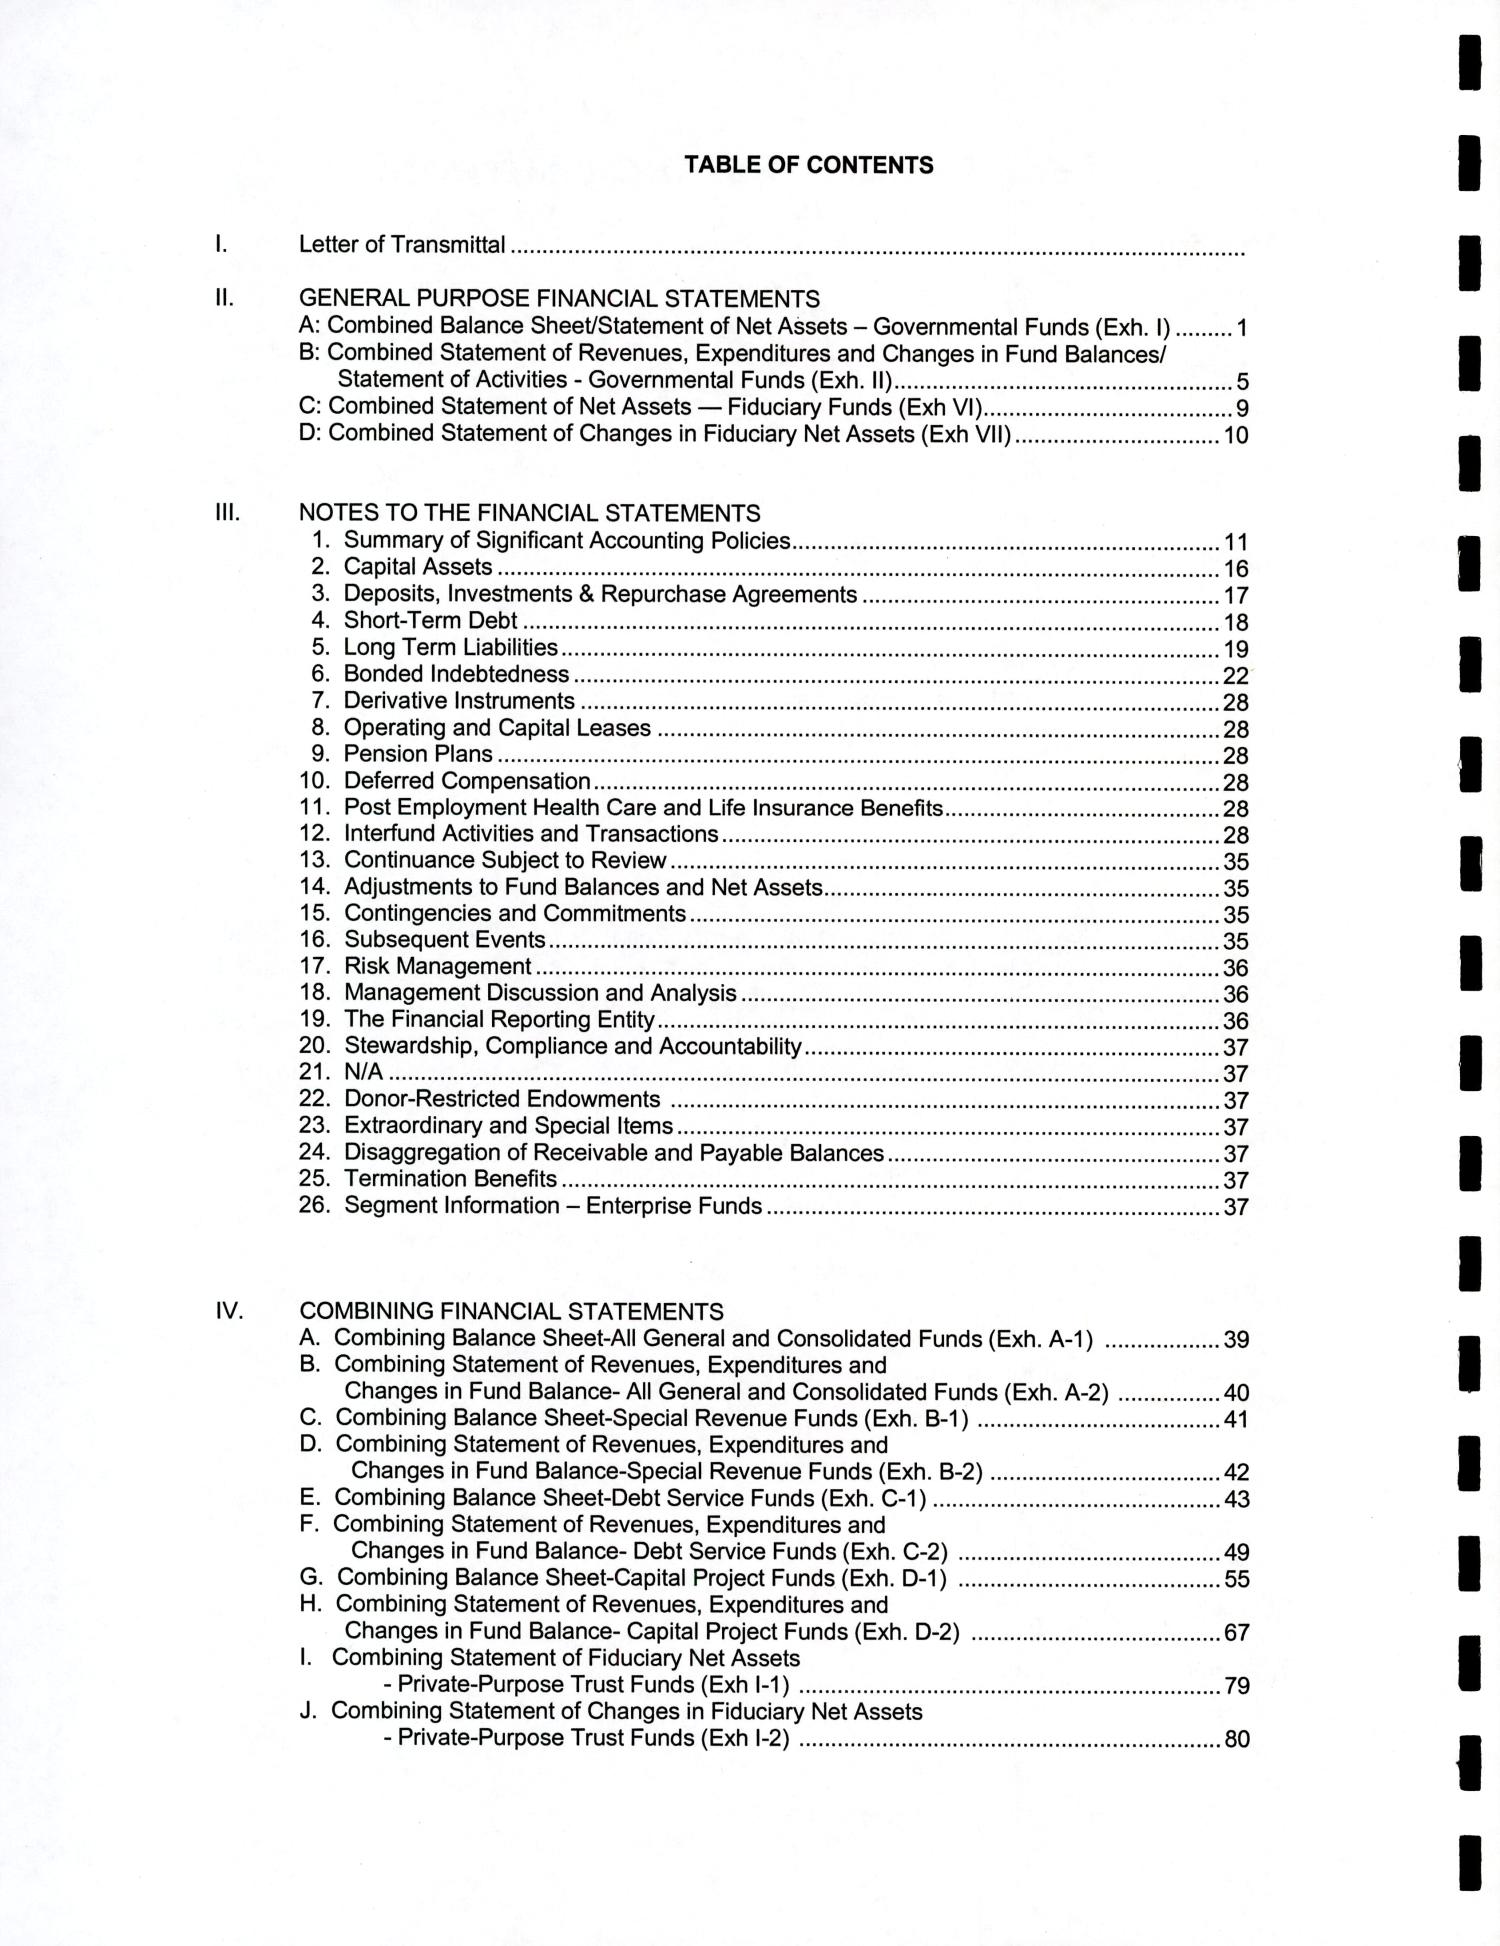 Texas Public Finance Authority Annual Financial Report: 2013
                                                
                                                    Table Of Contents
                                                